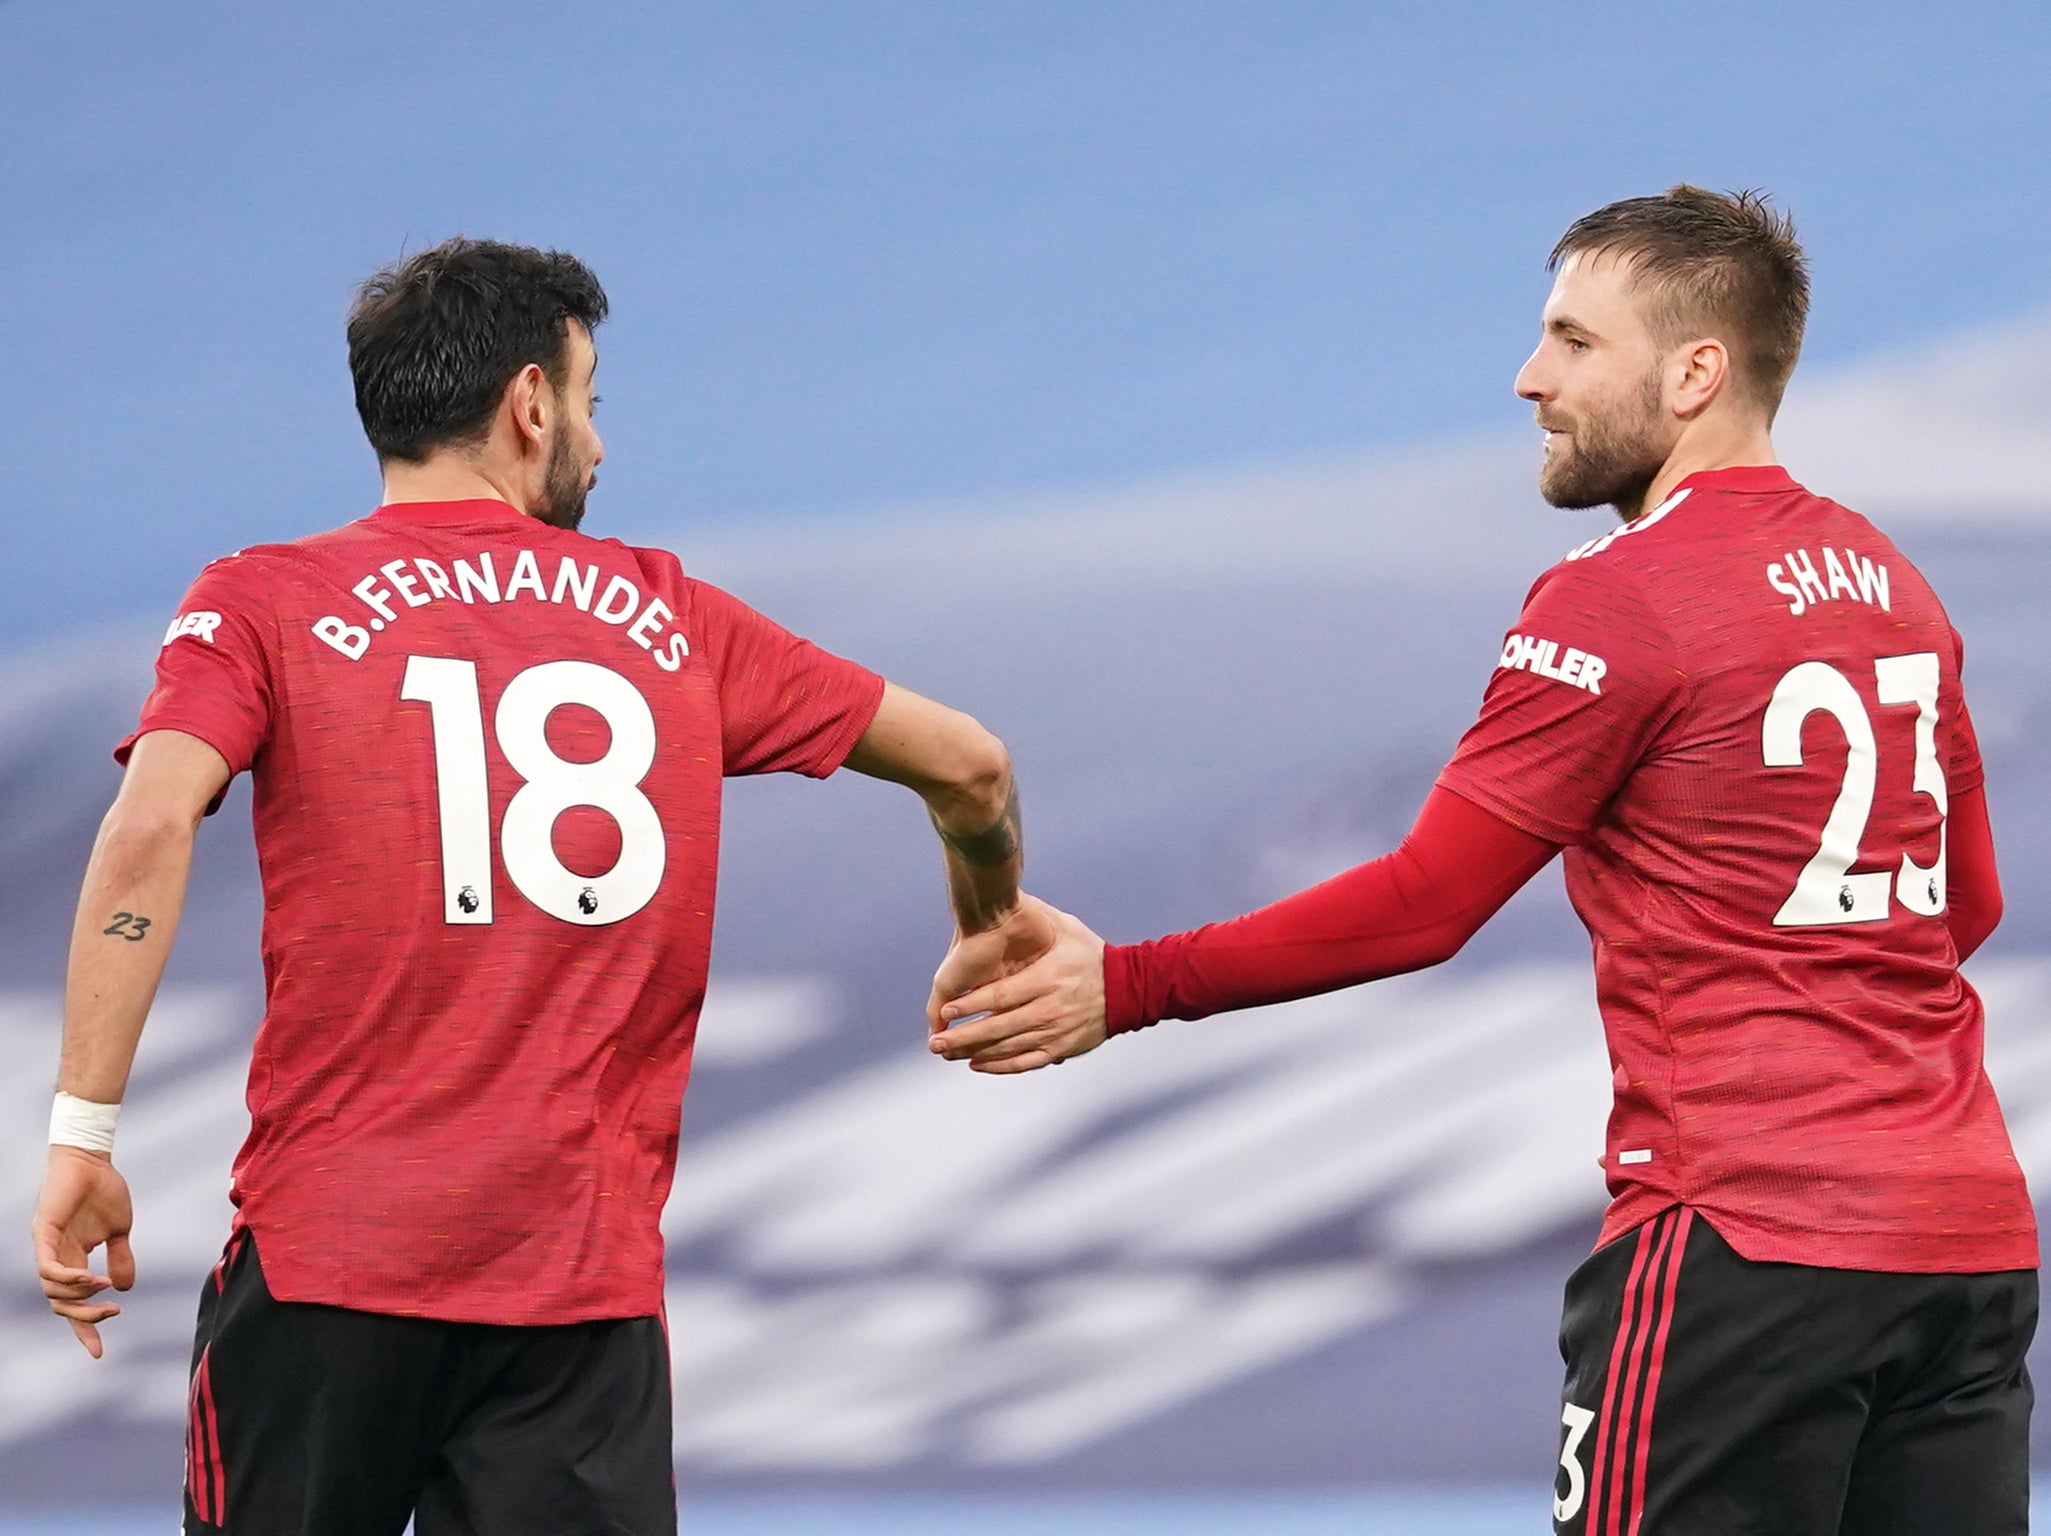 Bruno Fernandes and Luke Shaw netted as Manchester United won the derby